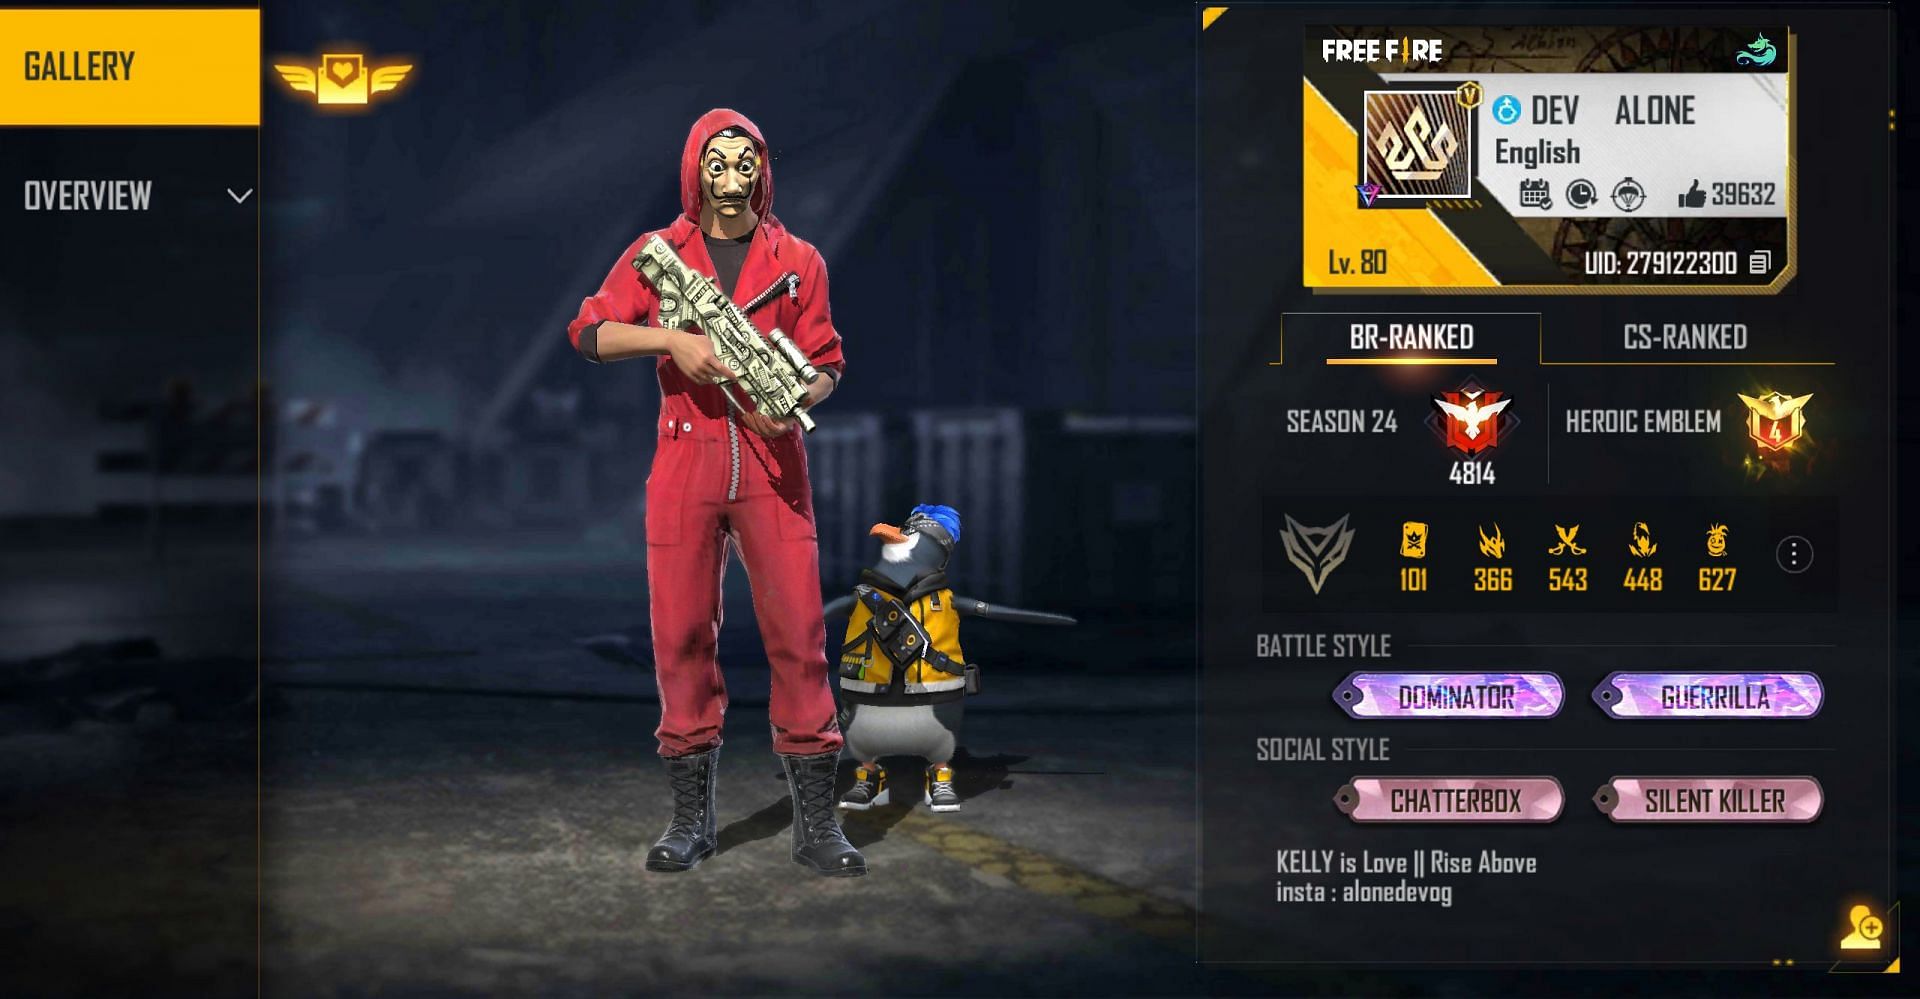 Dev Alone is an Indian Free Fire YouTuber (Image via Free Fire)